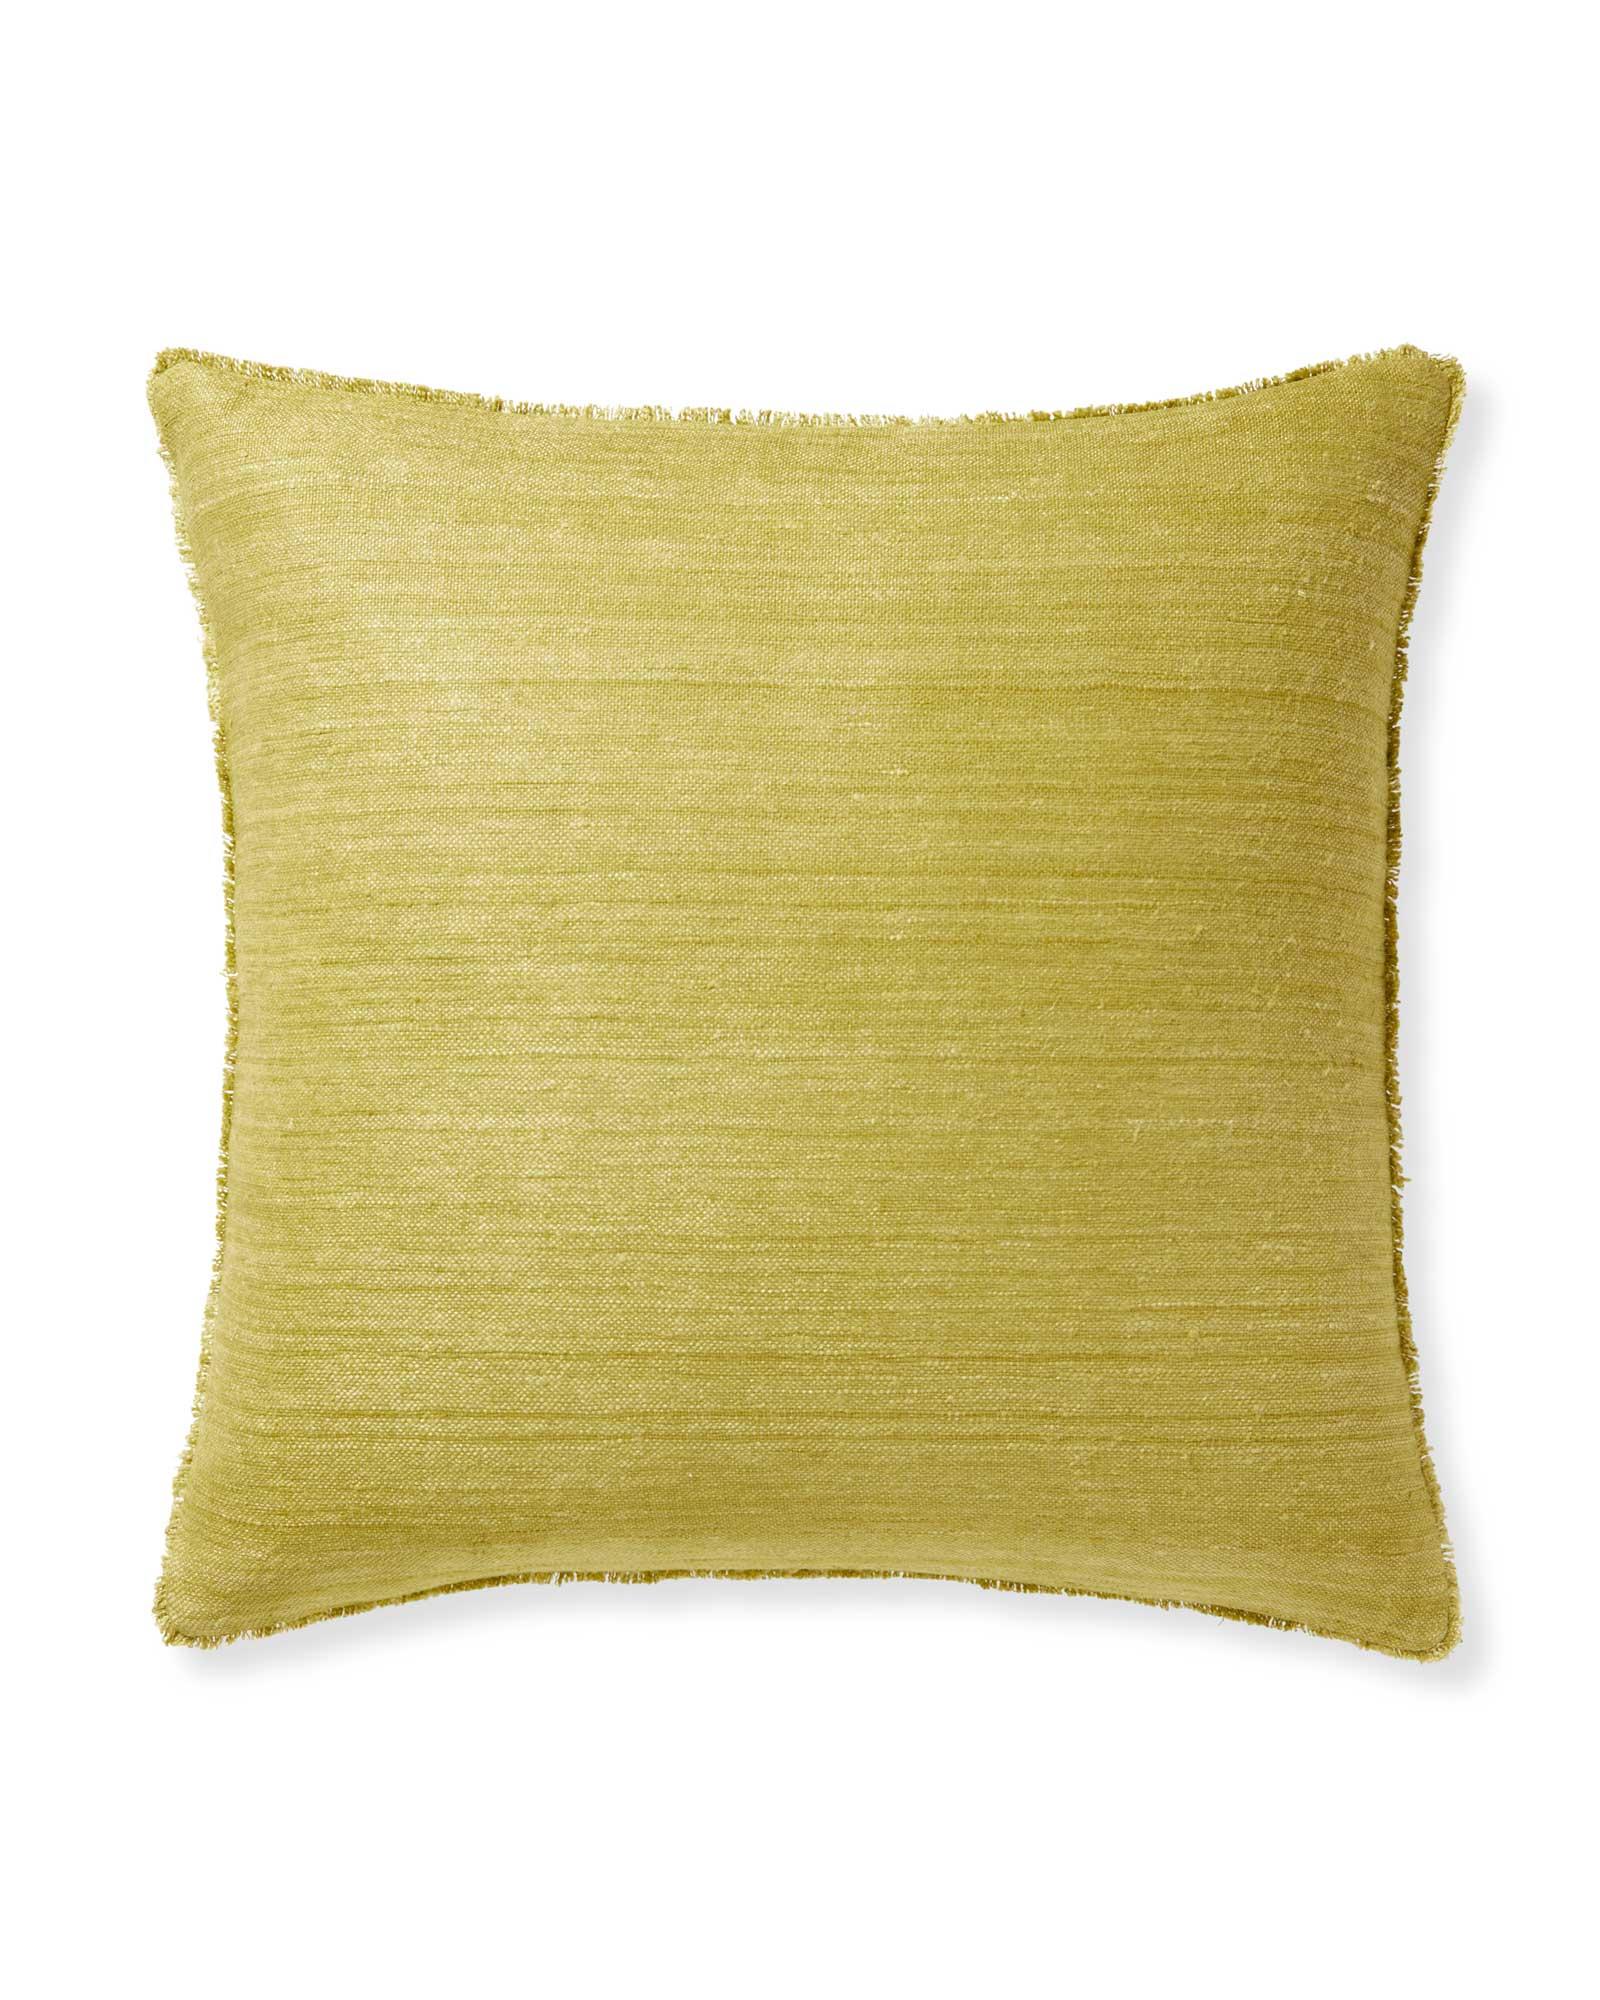 Wiltshire Raw Silk Pillow Cover Serena and Lily